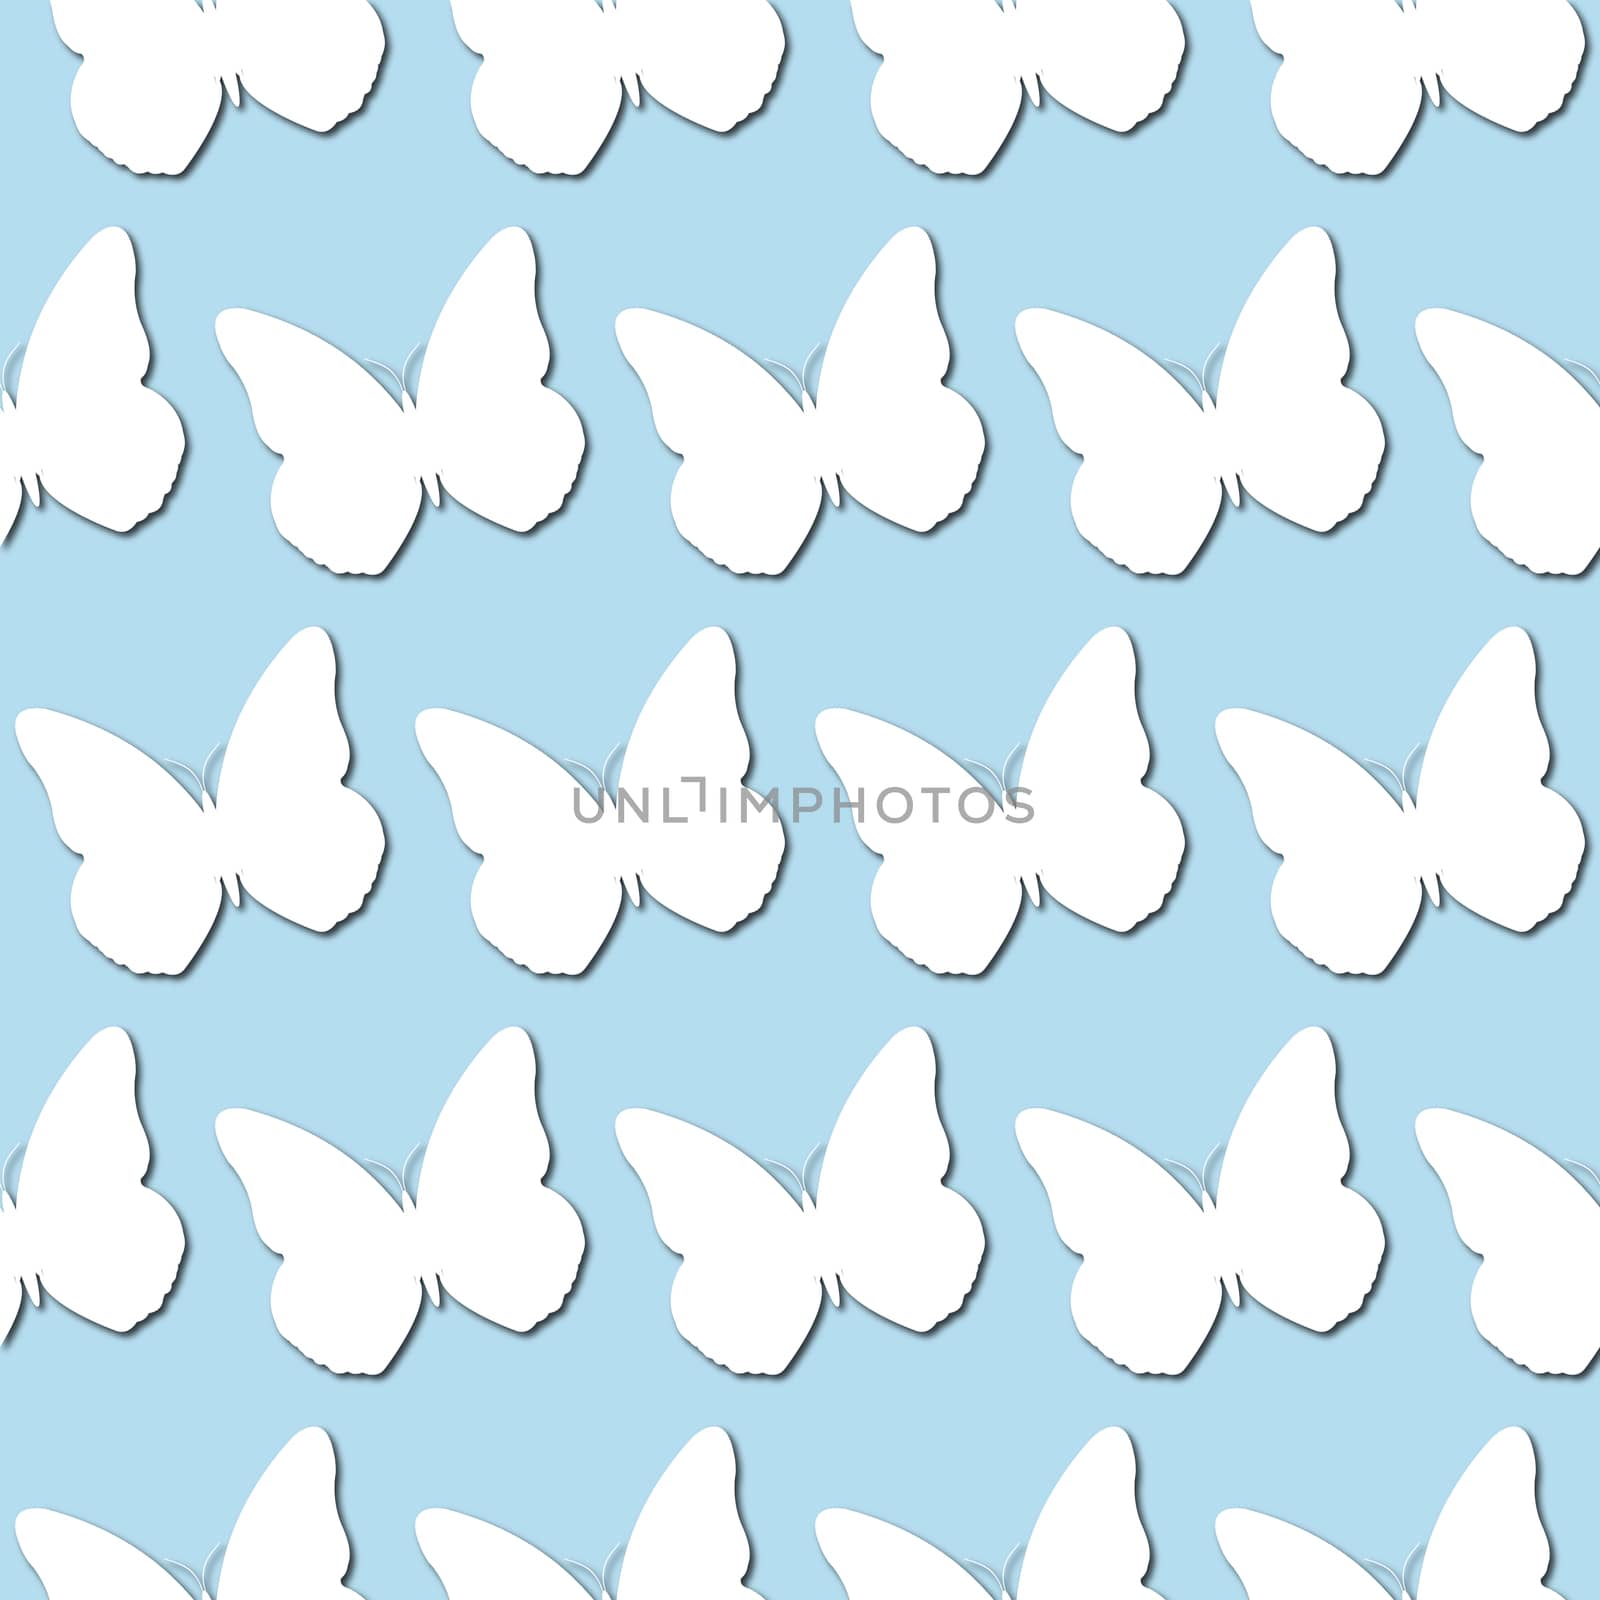 White butterfly silhouette on pale blue background, seamless pattern. Paper cut style with drop shadows and highlights.